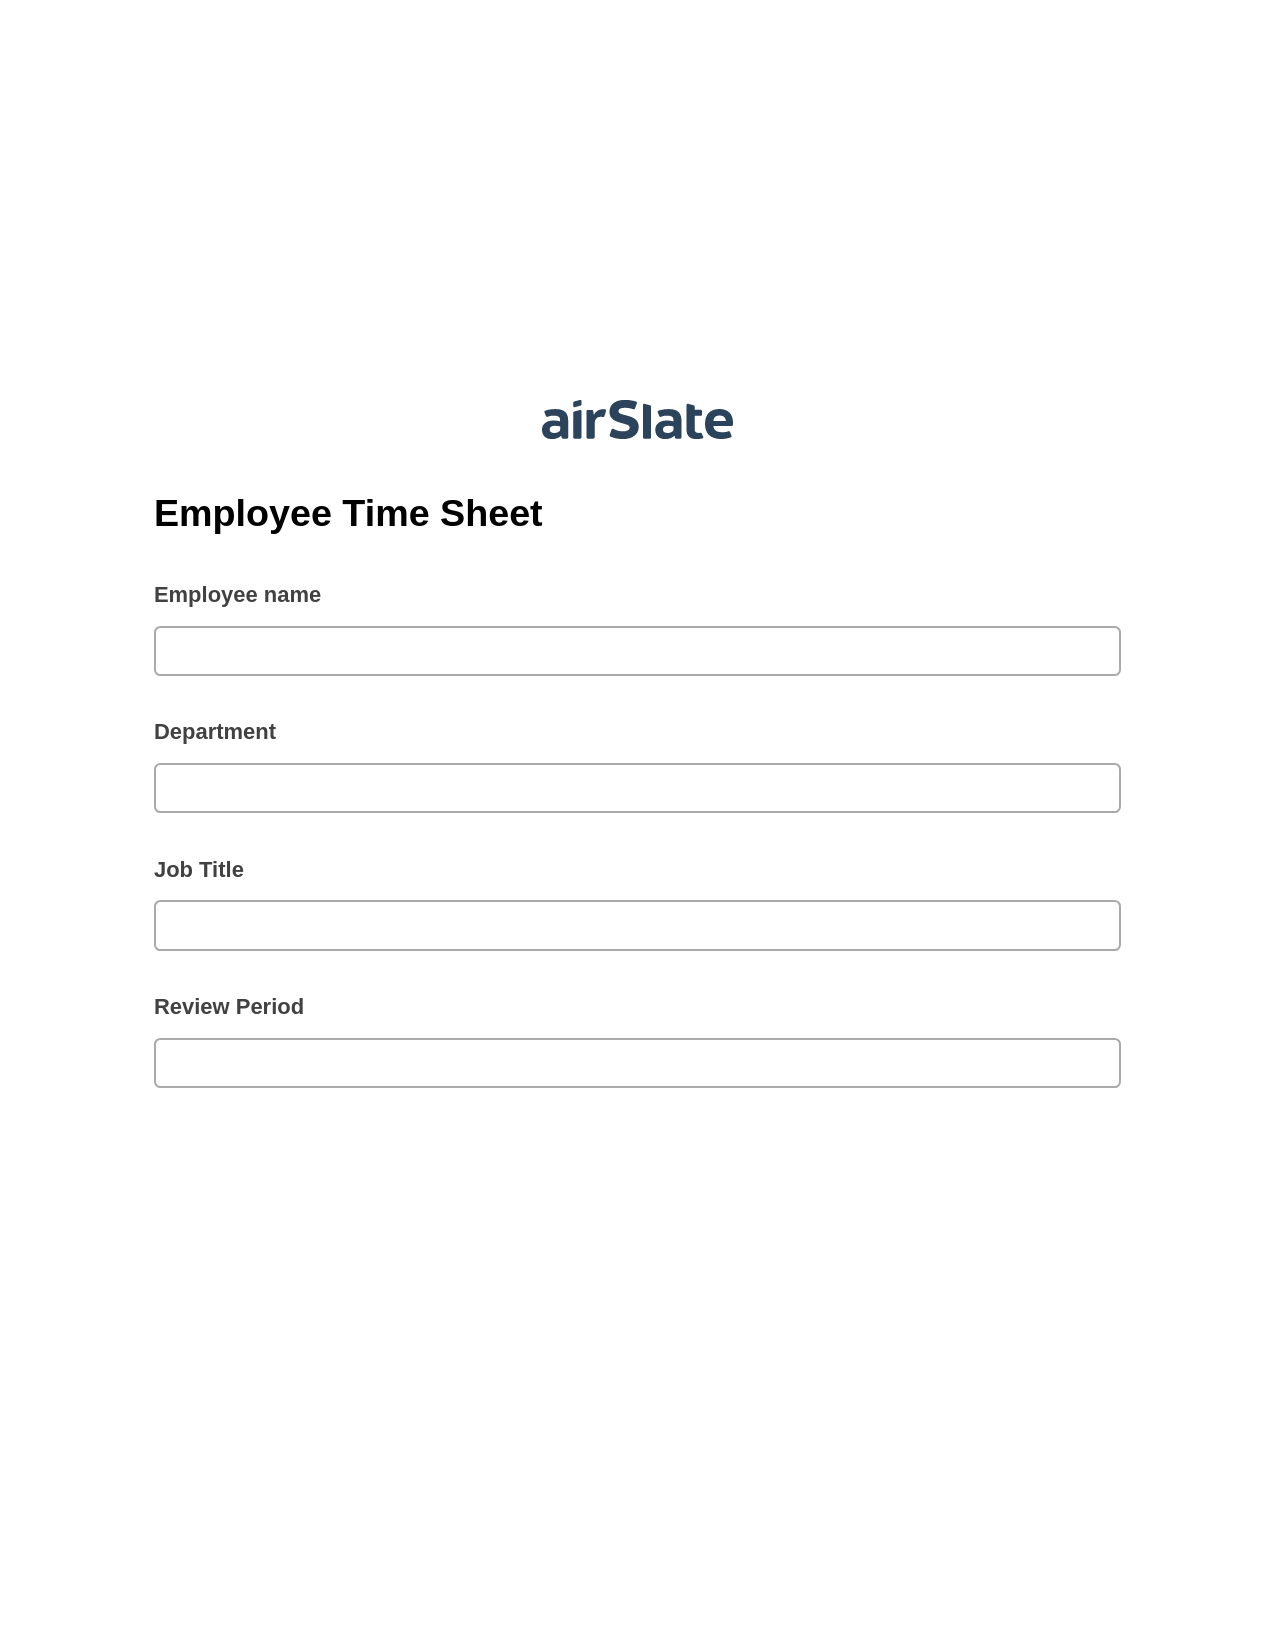 Employee Time Sheet Pre-fill from another Slate Bot, Update Audit Trail Bot, Export to WebMerge Bot